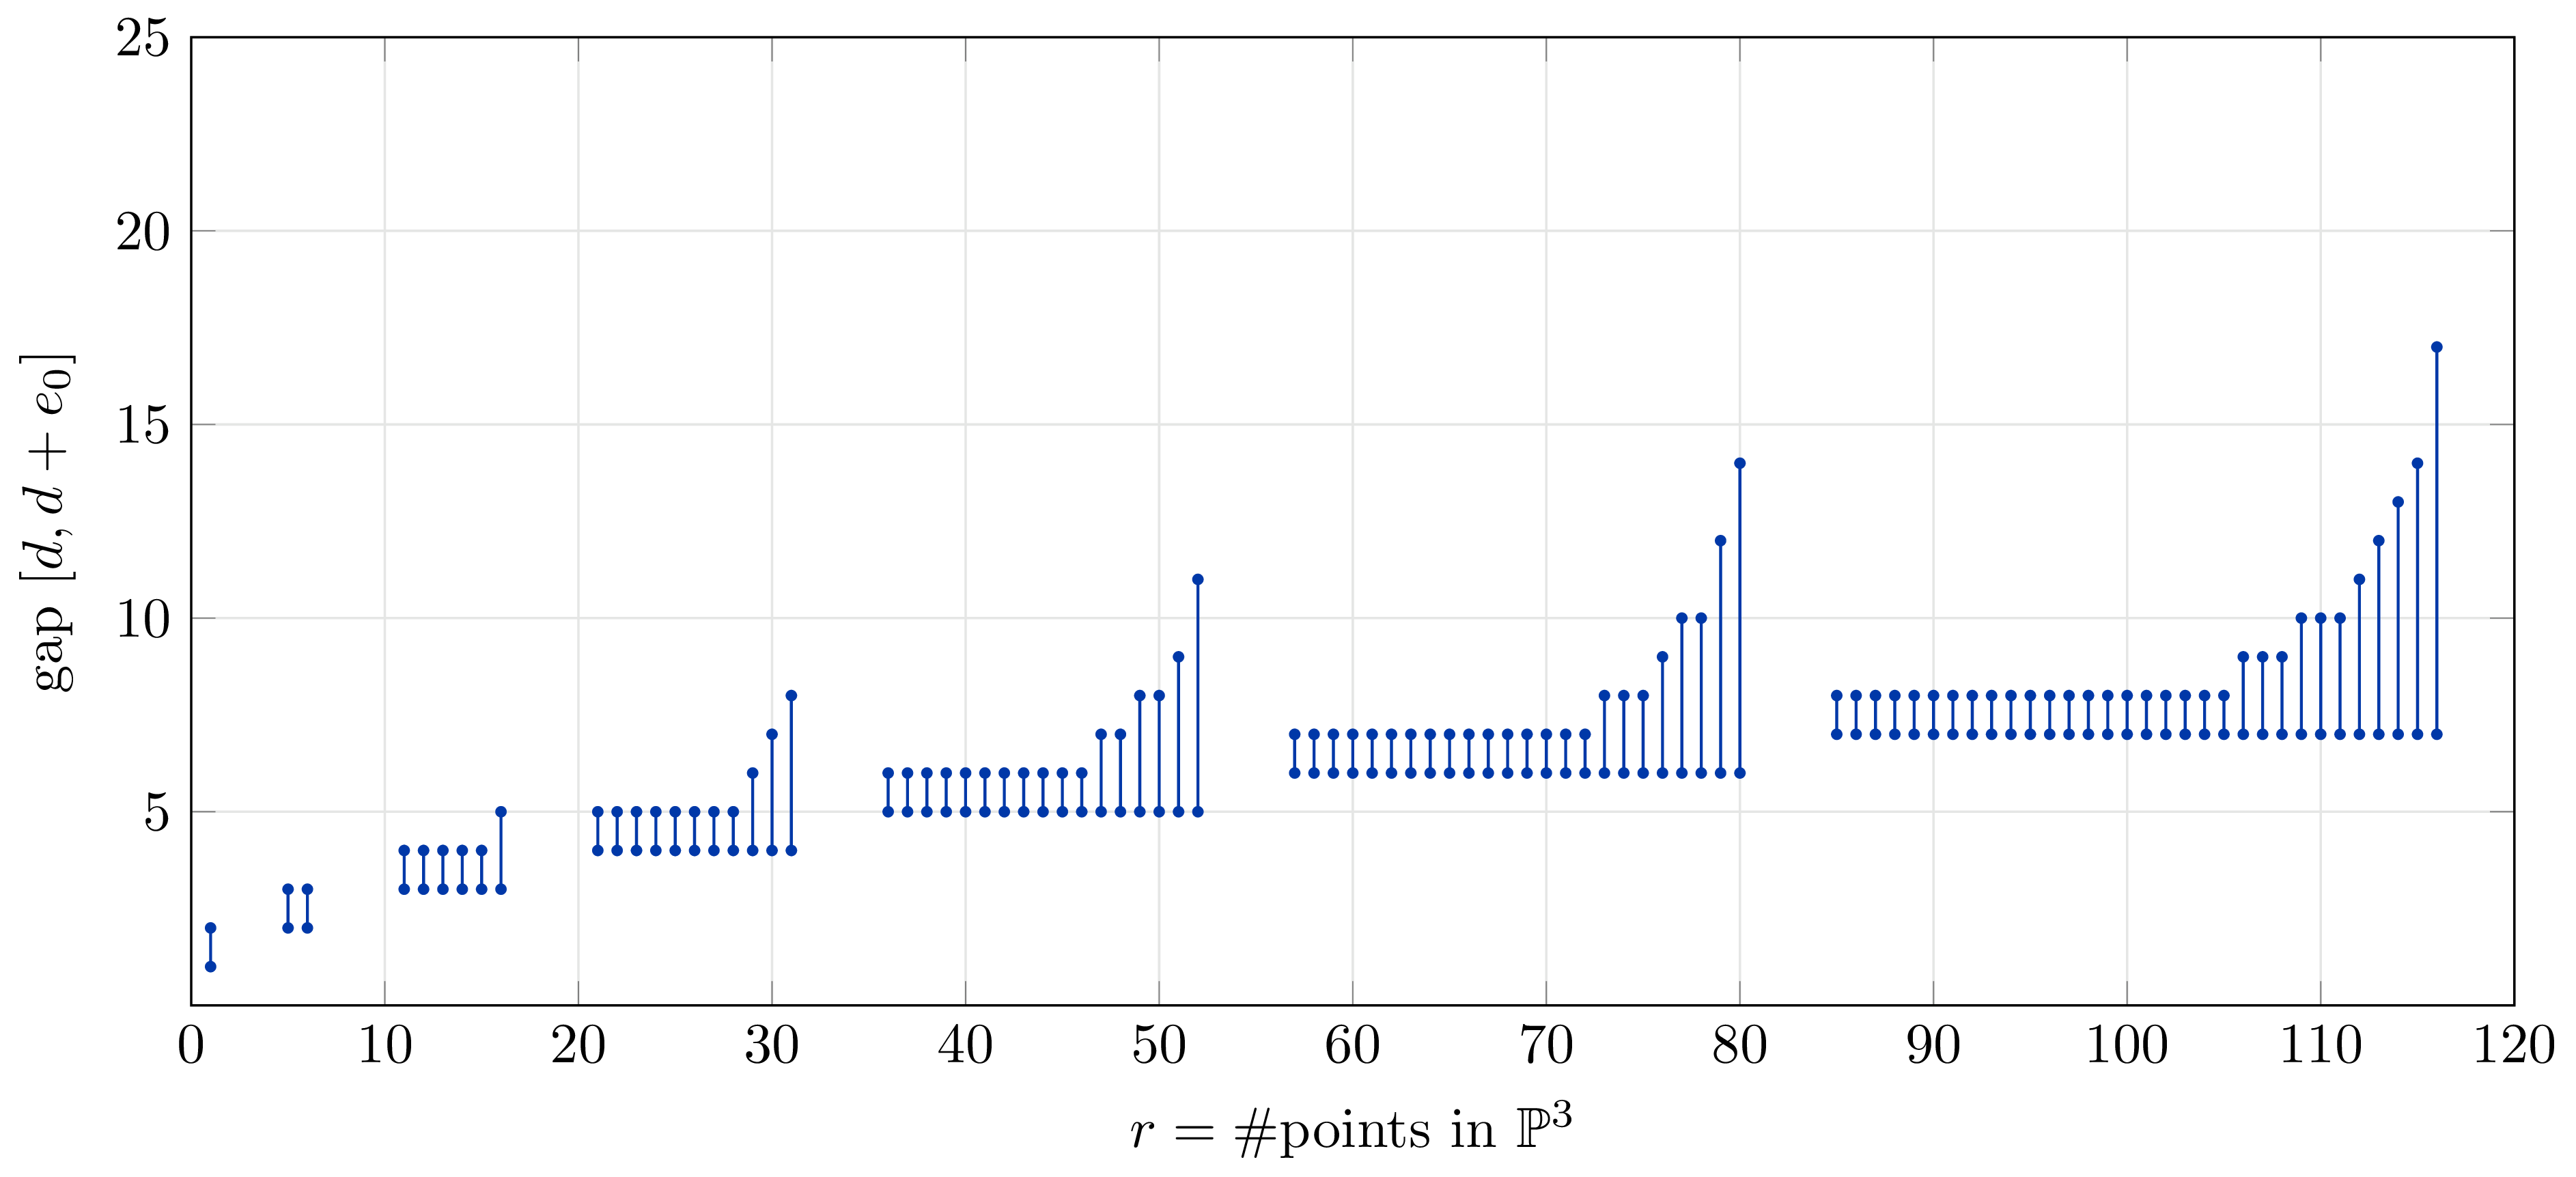 The expected saturation gaps for r at most 117 points in P3.